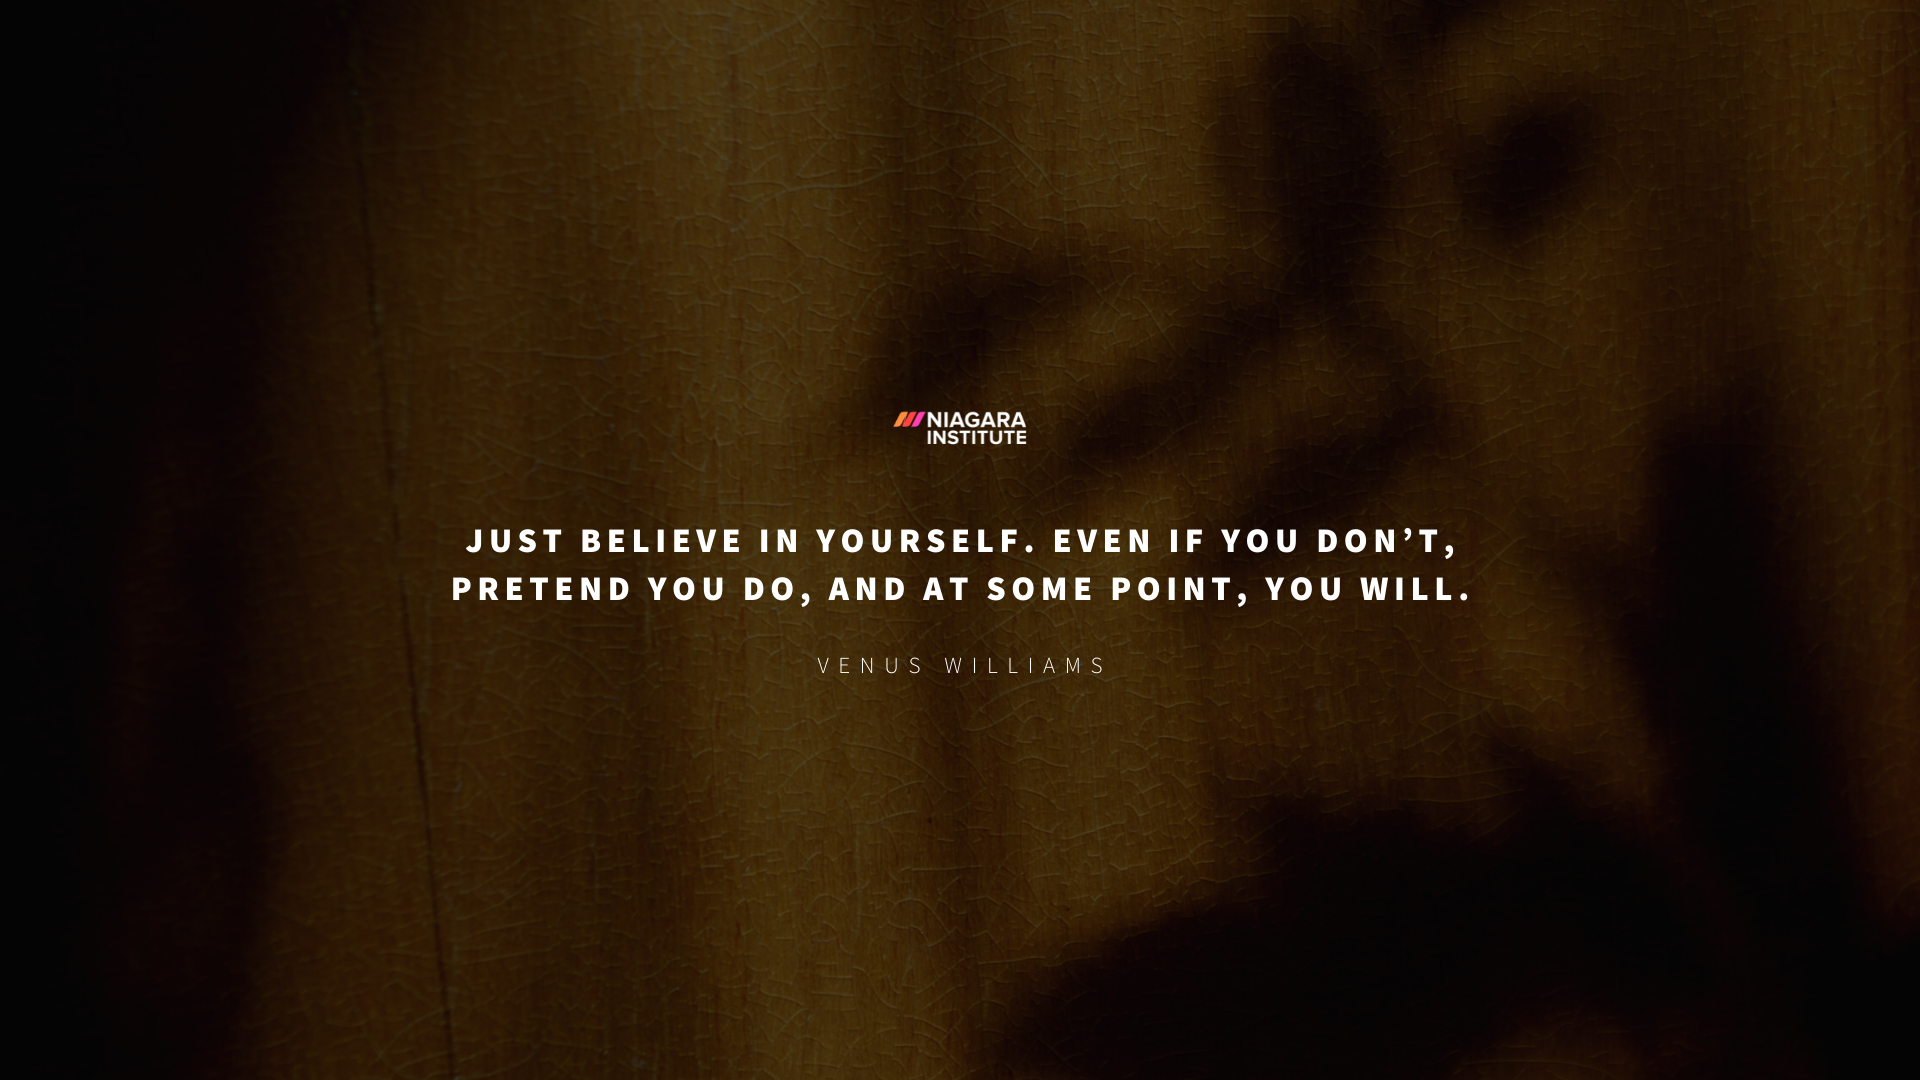 Believe in Yourself Quote from Venus Williams